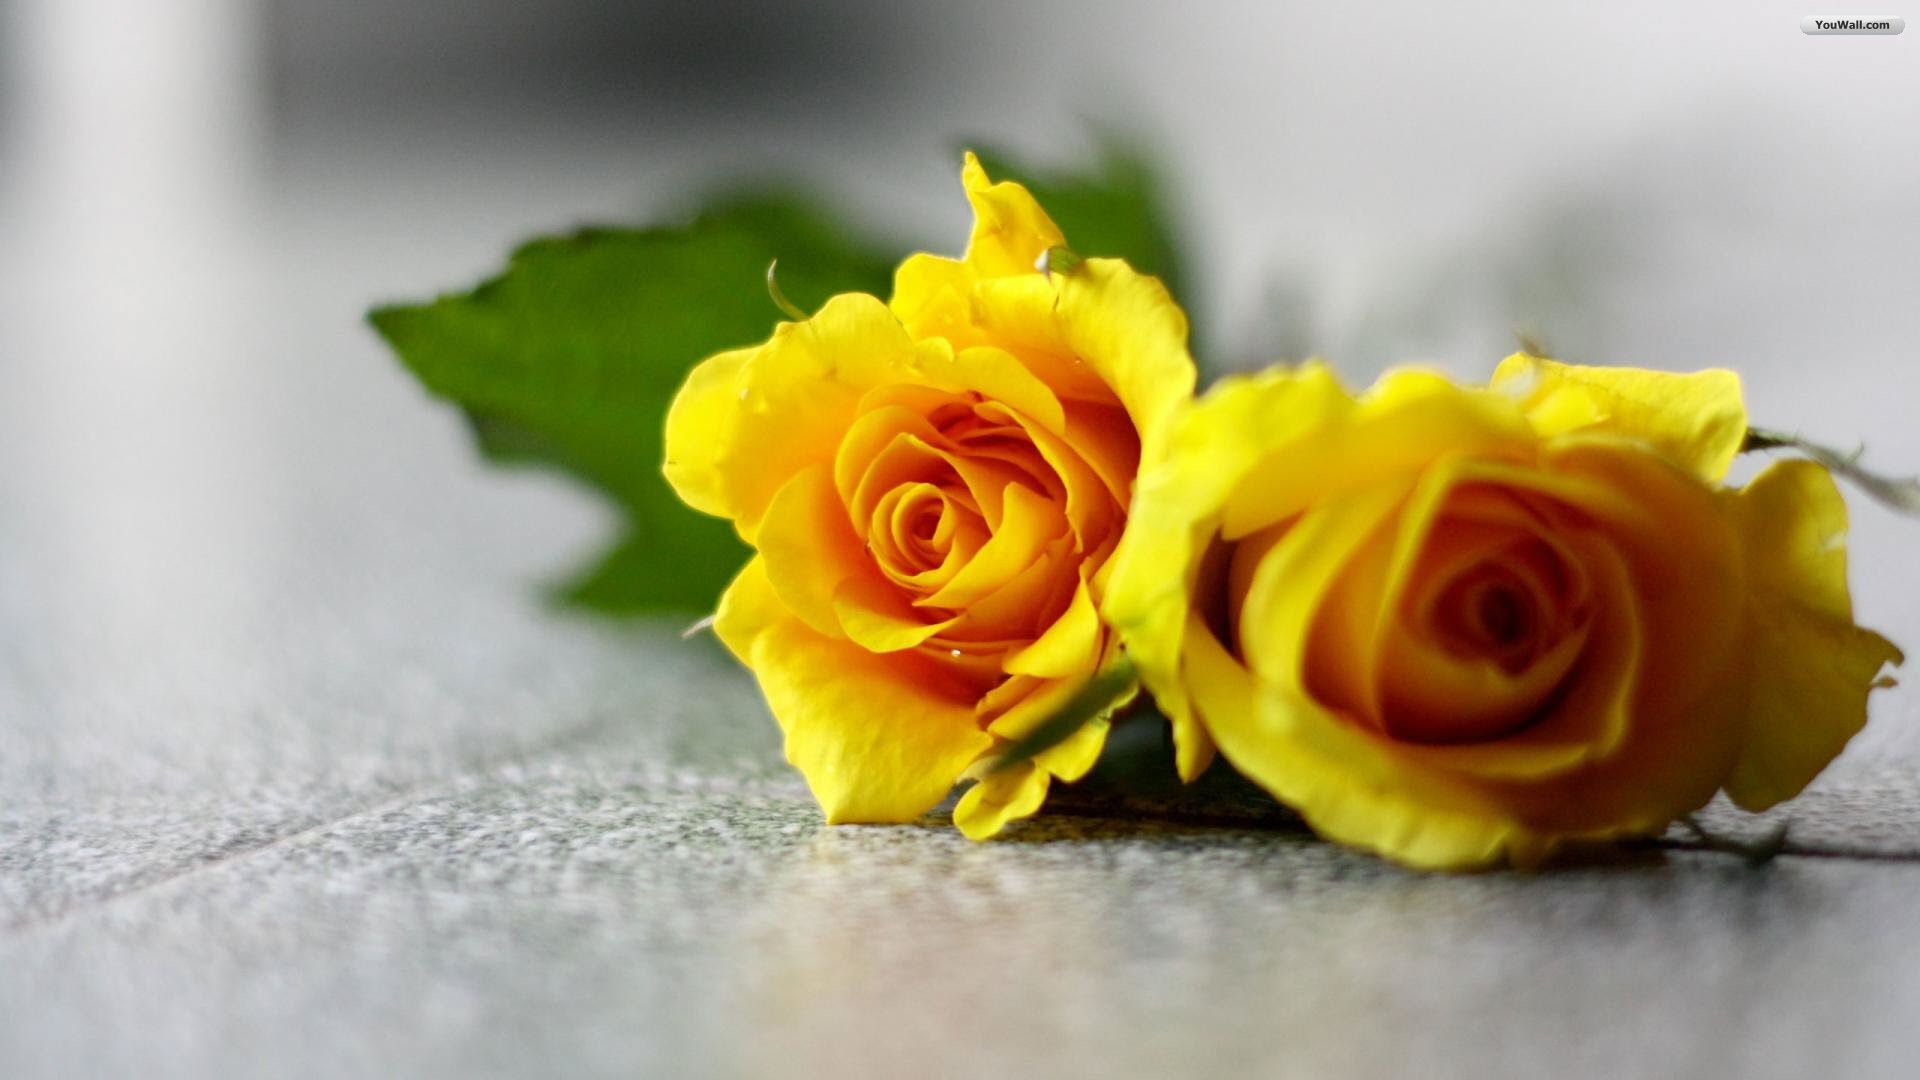 Yellow Rose Wallpapers High Quality | Download Free